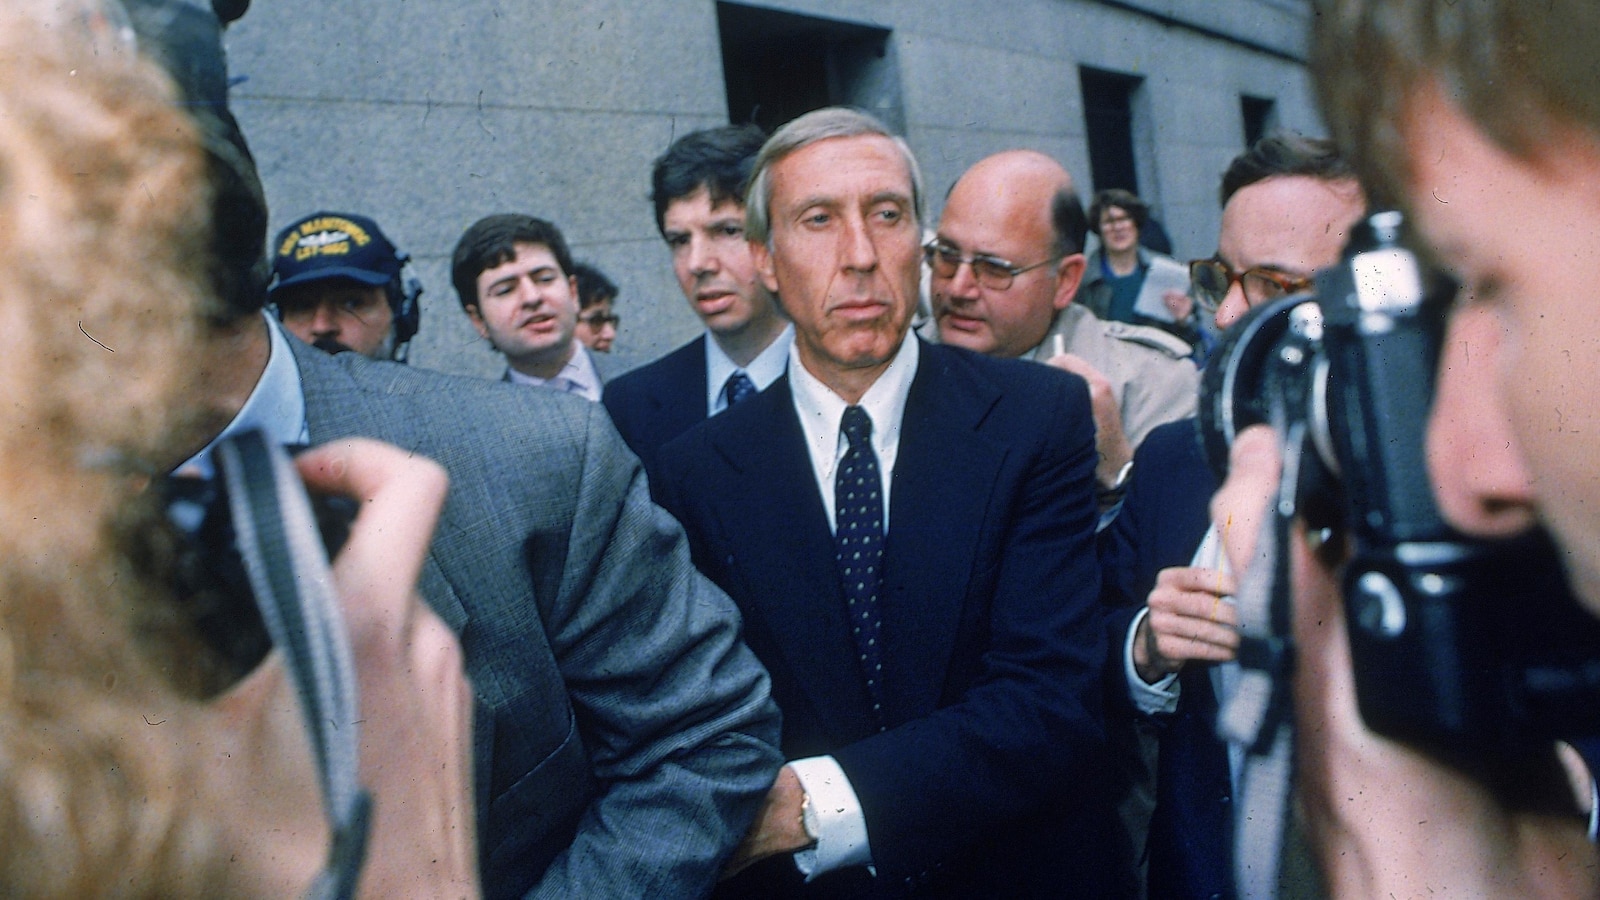 Ivan Boesky, stock trader convicted in insider trading scandal, has died aged 87, according to reports